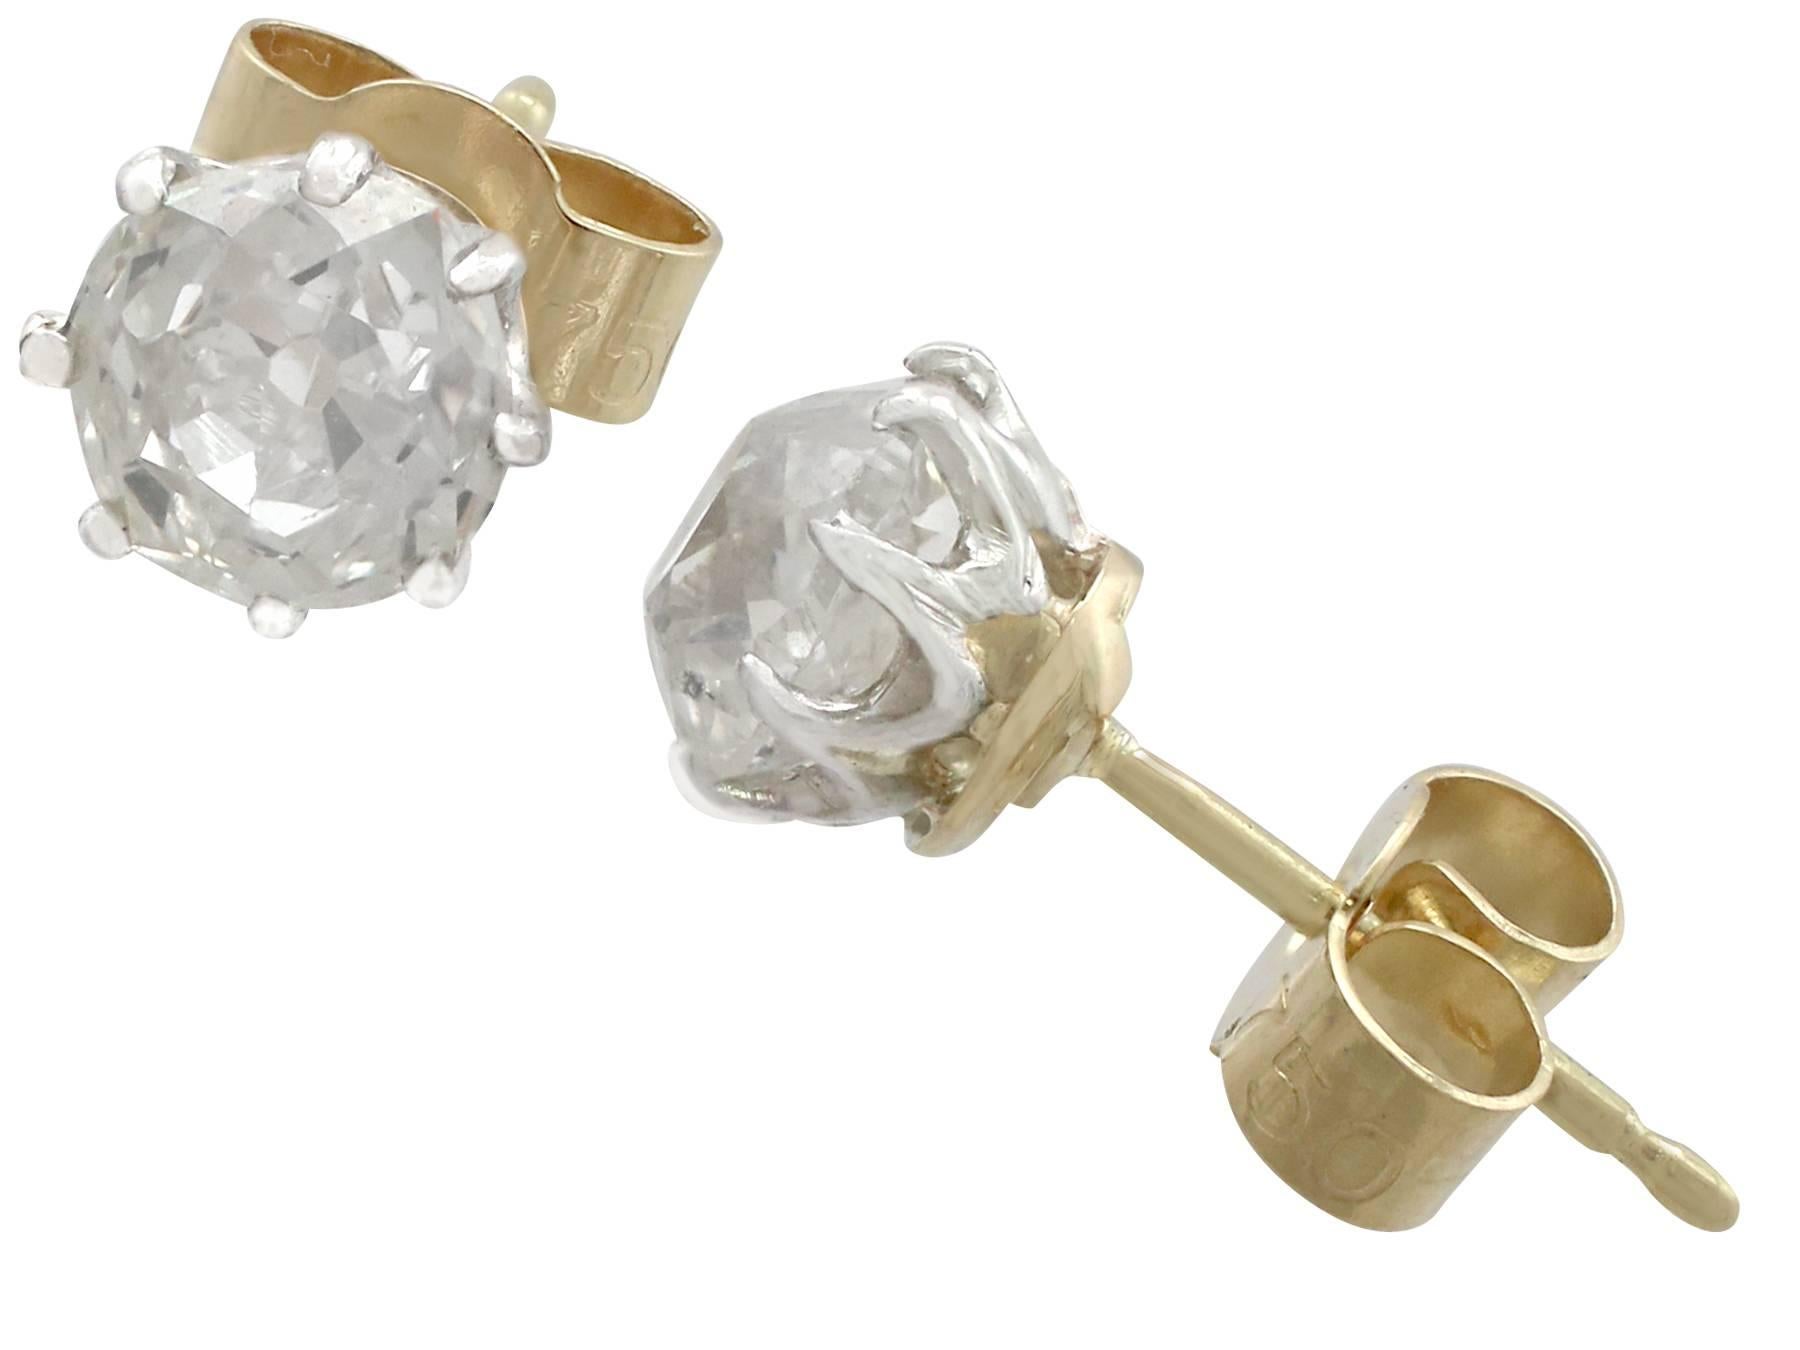 An impressive pair of antique 1.78 carat diamond and 18 karat white and yellow gold stud earrings; part of our diverse antique jewellery and estate jewelry collections

These fine and impressive antique diamond studs have been crafted in 18k white